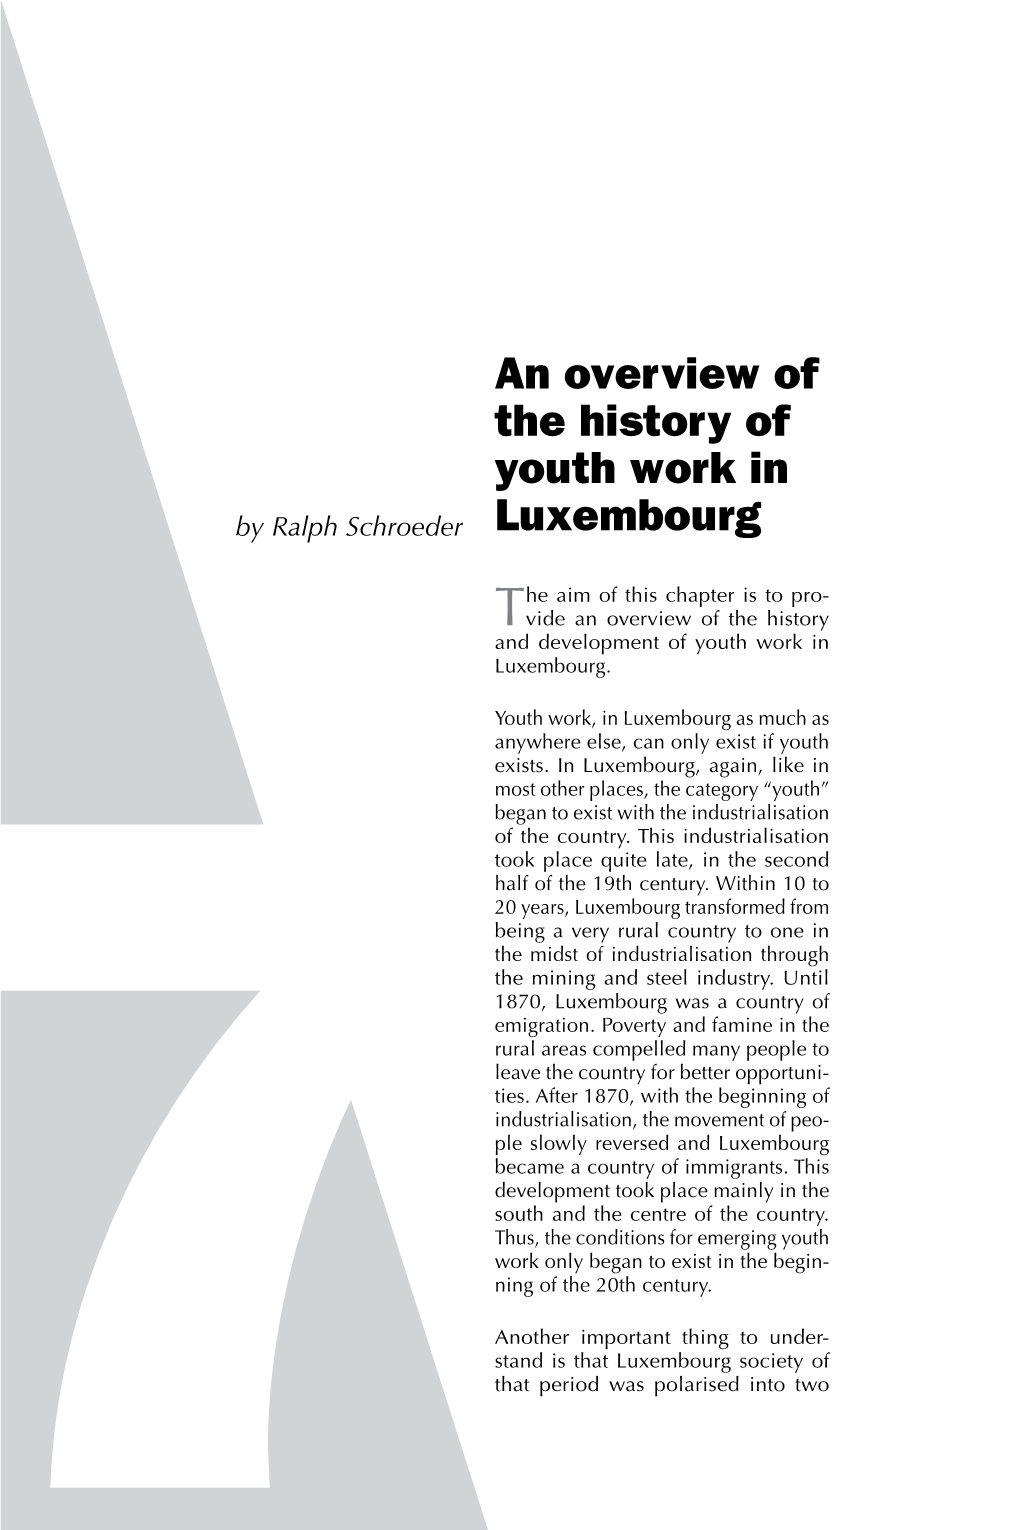 An Overview of the History of Youth Work in Luxembourg 64